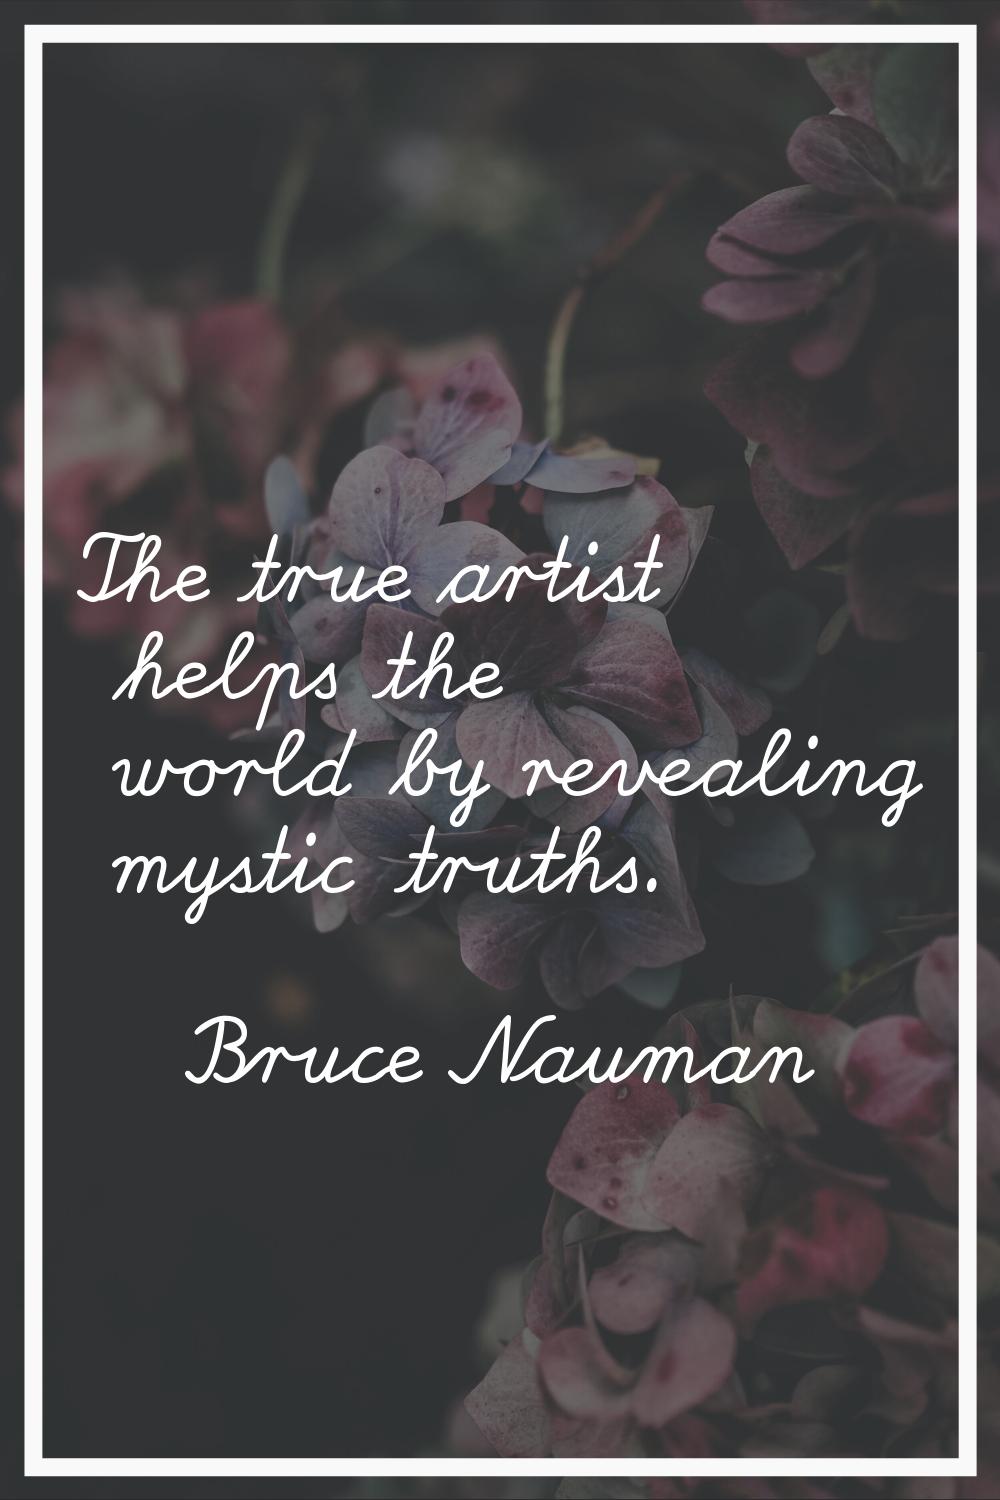 The true artist helps the world by revealing mystic truths.